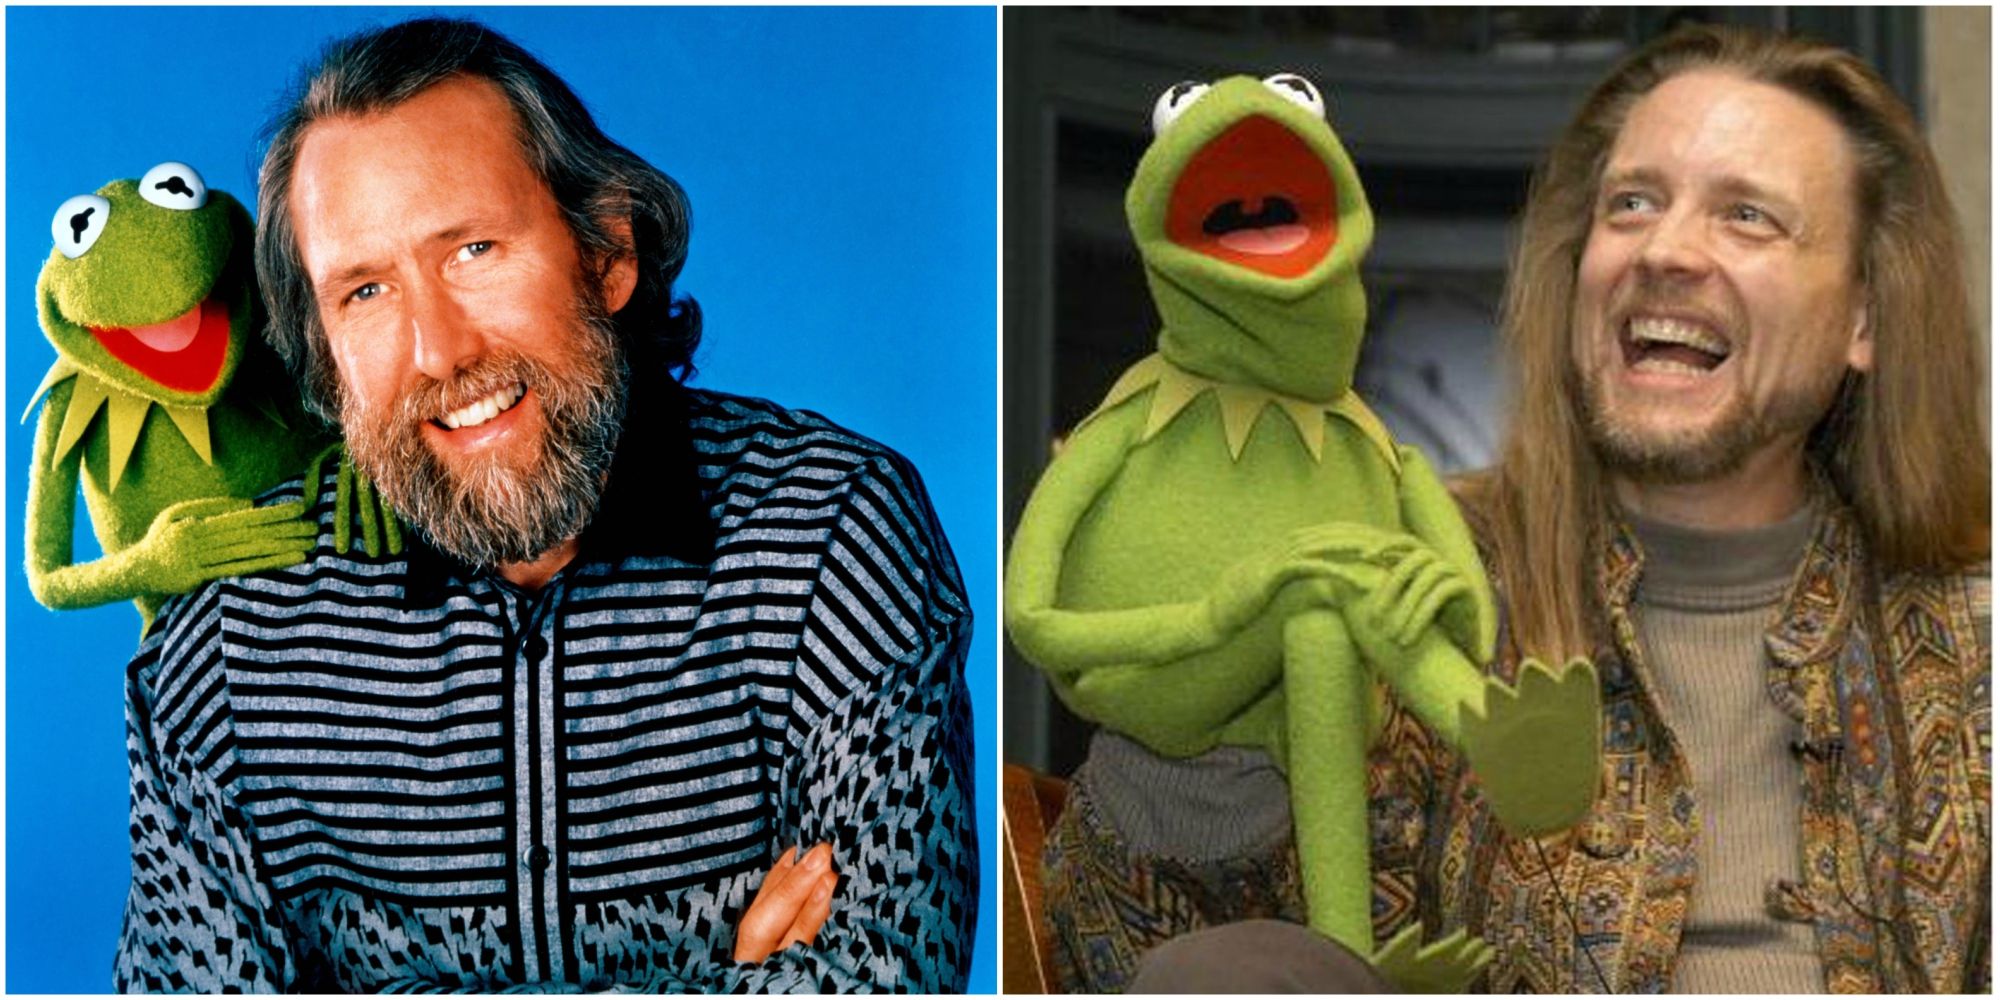 Kermit the Frog with Jim Henson and Steve Whitmire